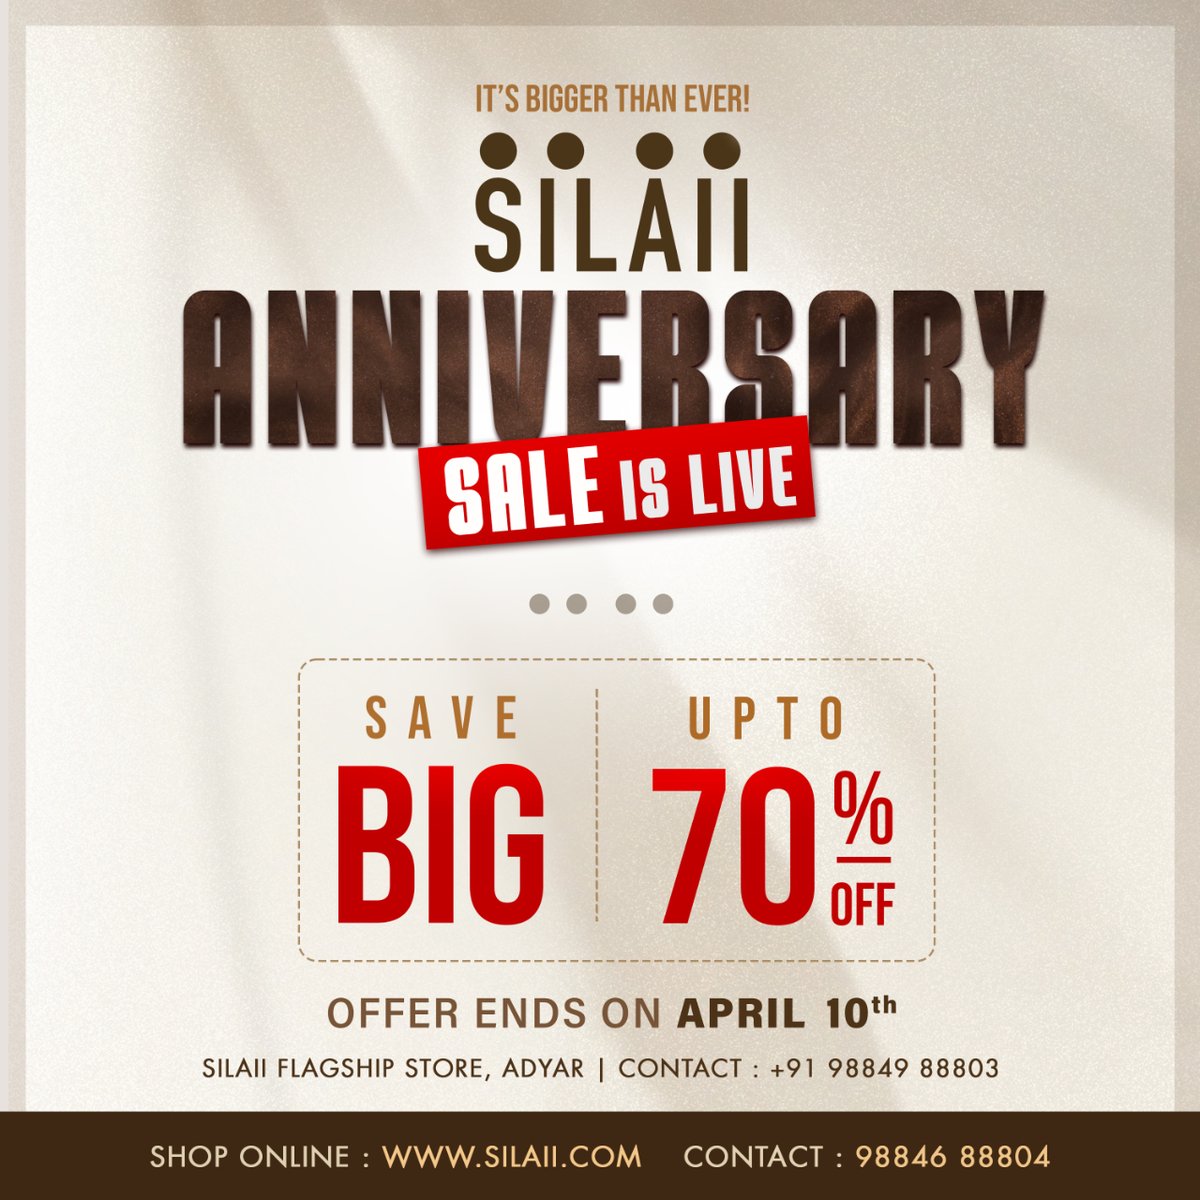 🎉 Sale is Live! 🎉 Get up to 70% off at the SILAII Anniversary Sale! Hurry, Offer Ends on April 10th. #SILAII #AnniversarySale #SculptureSale #HomeDecor #OnlineShopping #SILAIIArt #Collectables #Gifting #CorporateGifting #Collections  #SILAIIAnniversarySale #Sculpture #Sale